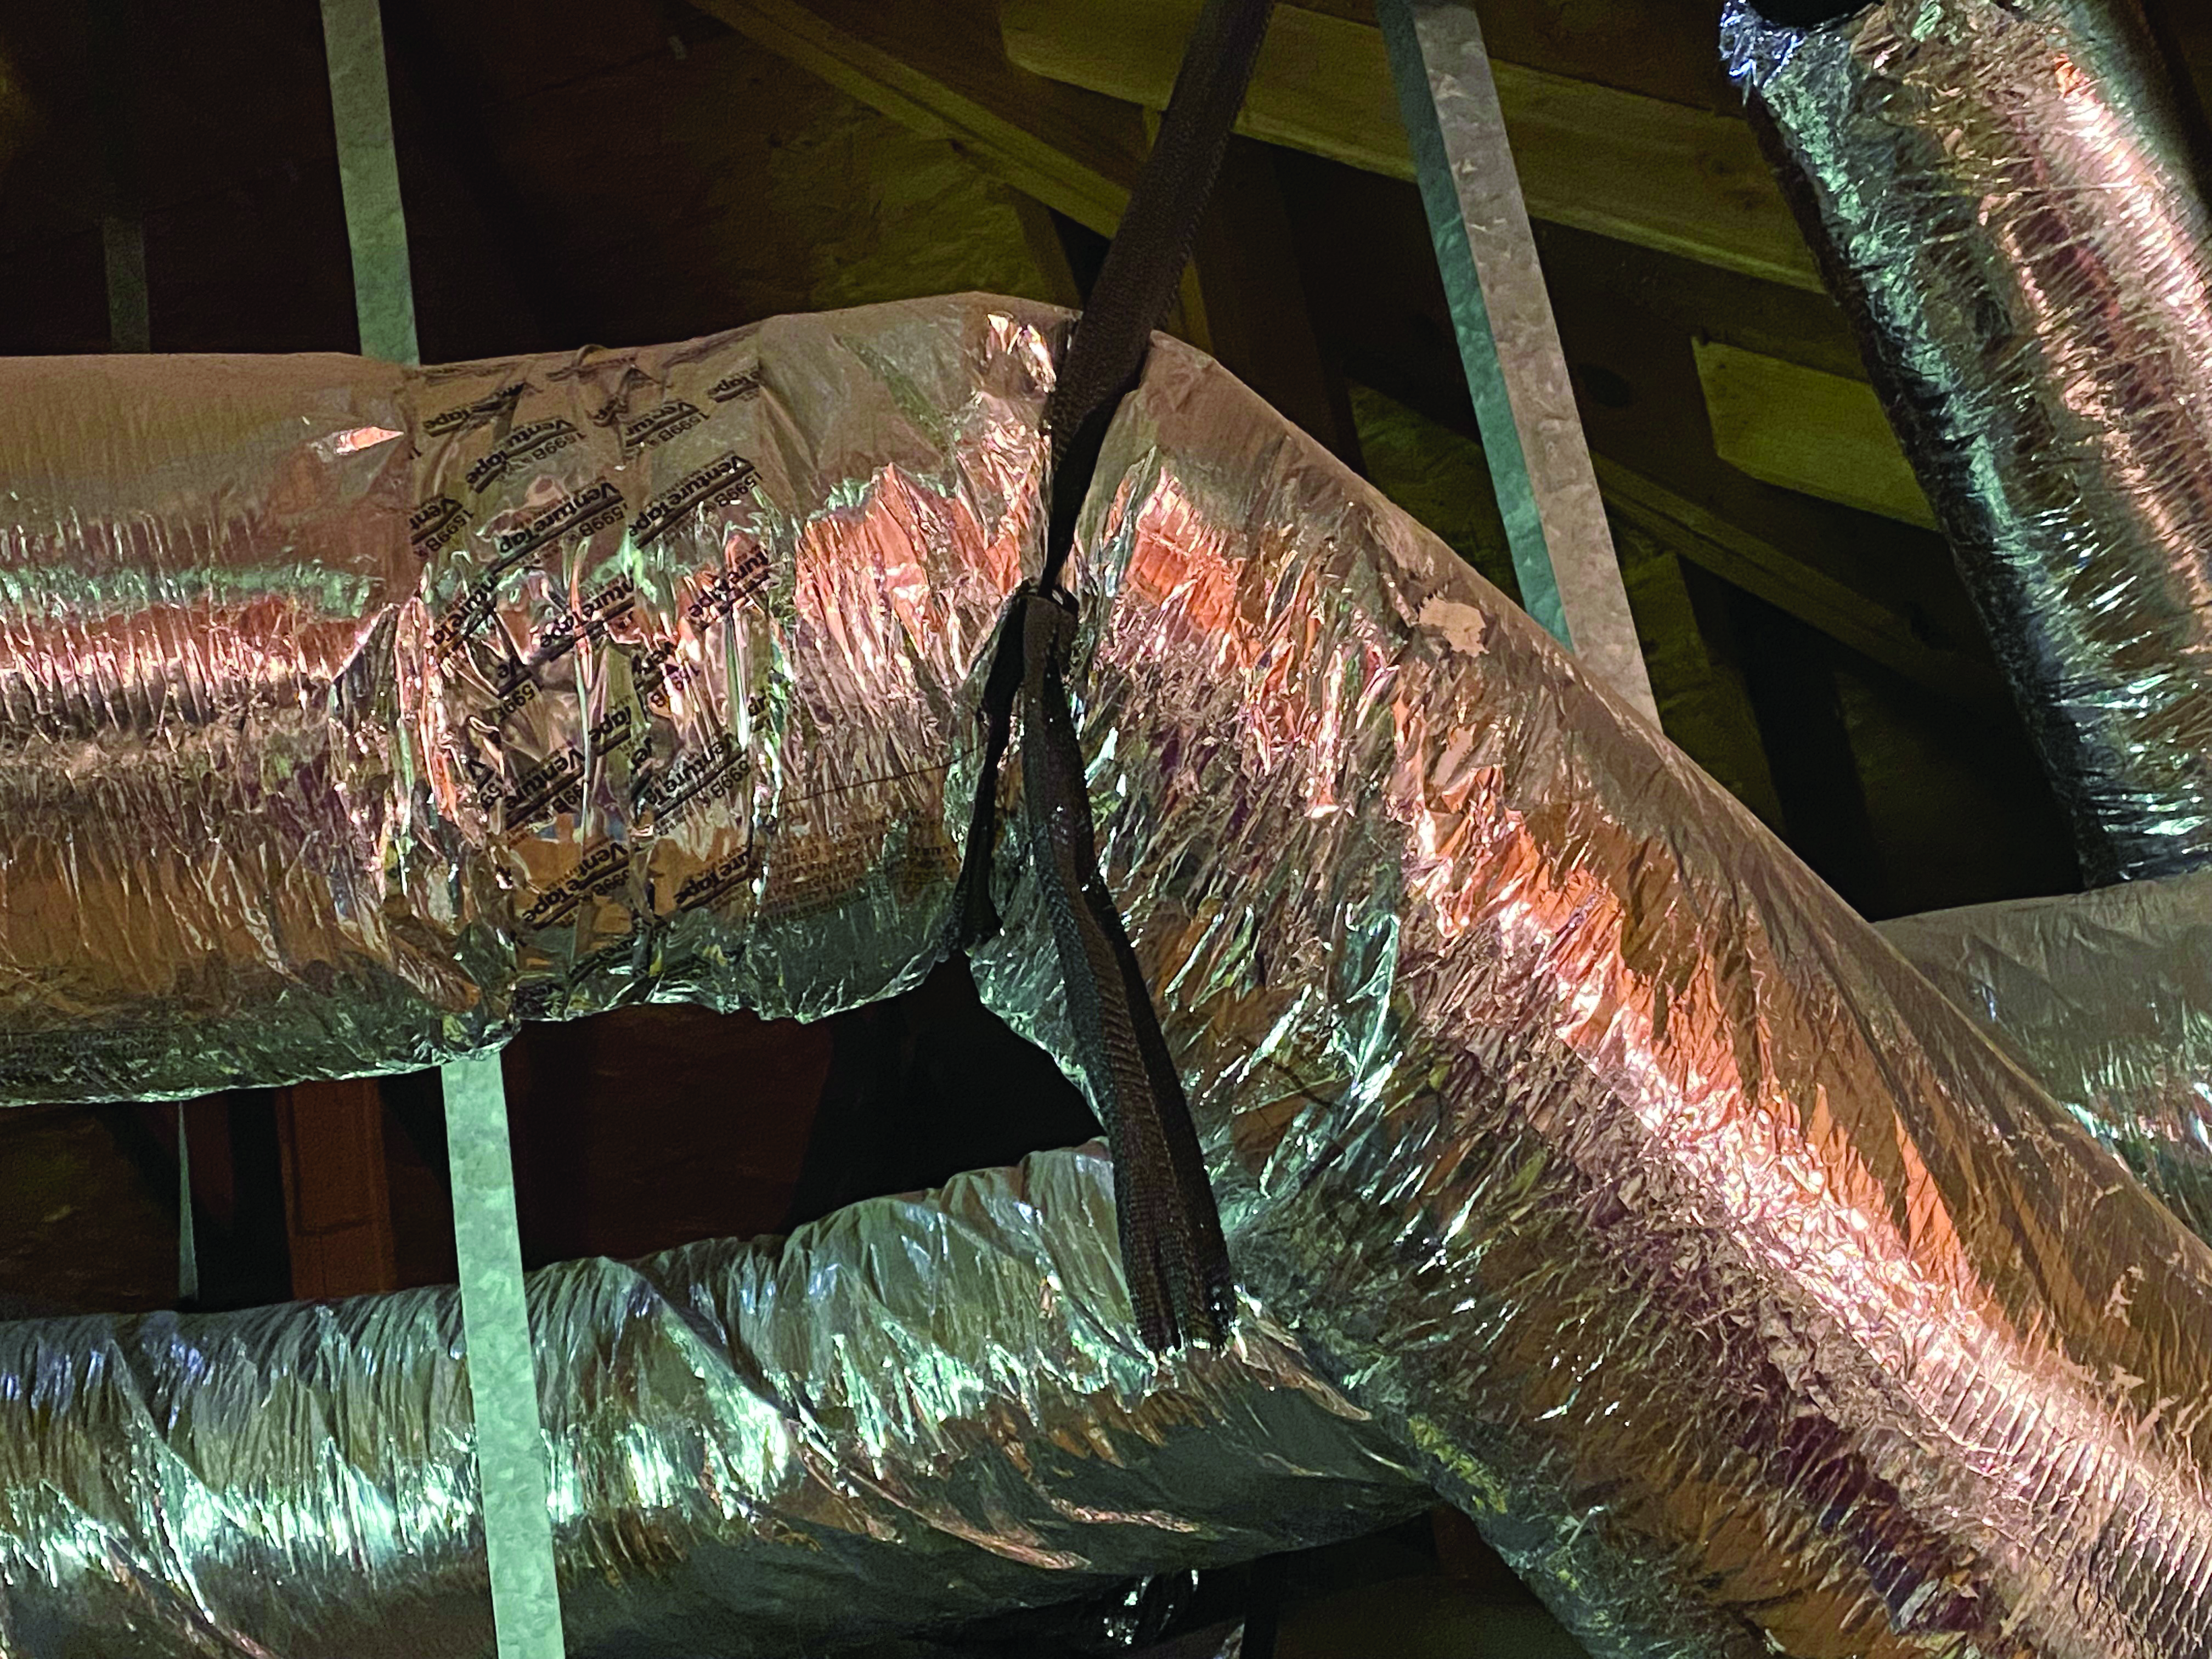 Kinked AC ductwork